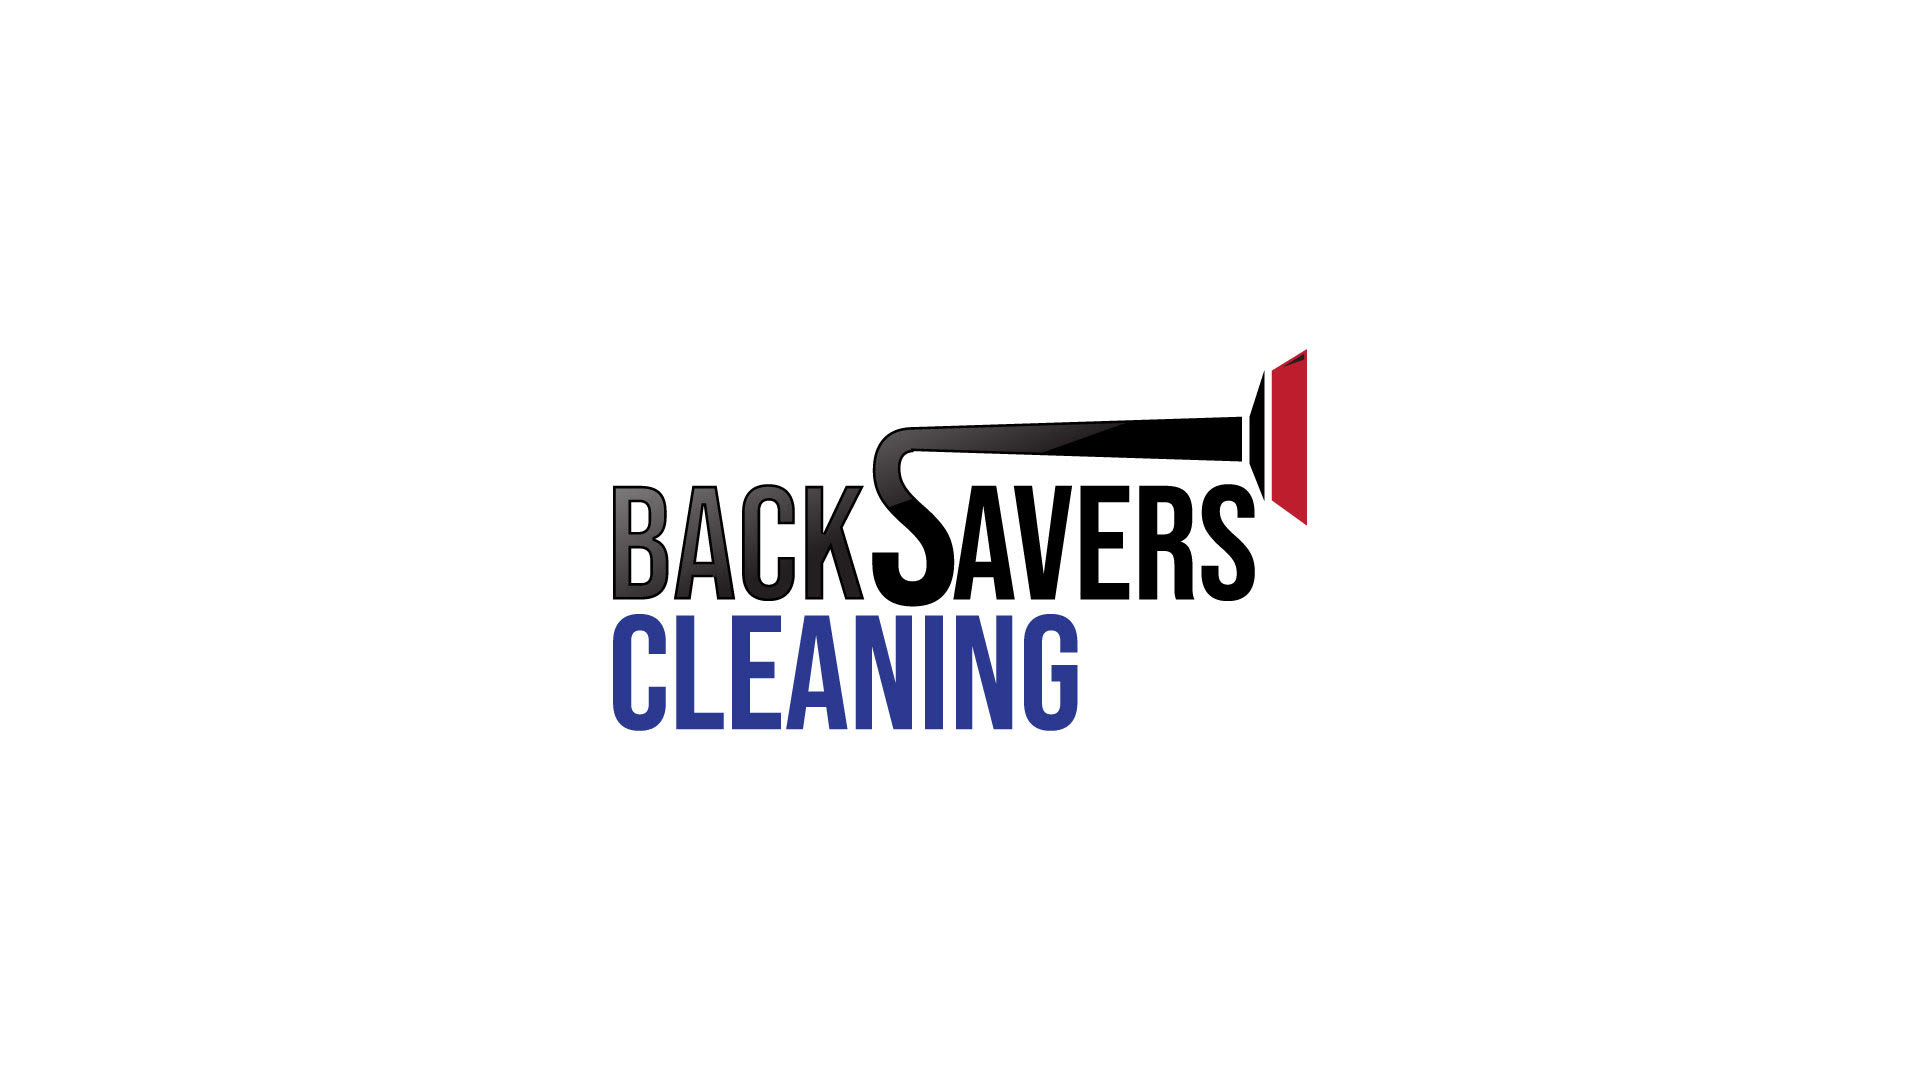 Back Savers Cleaning